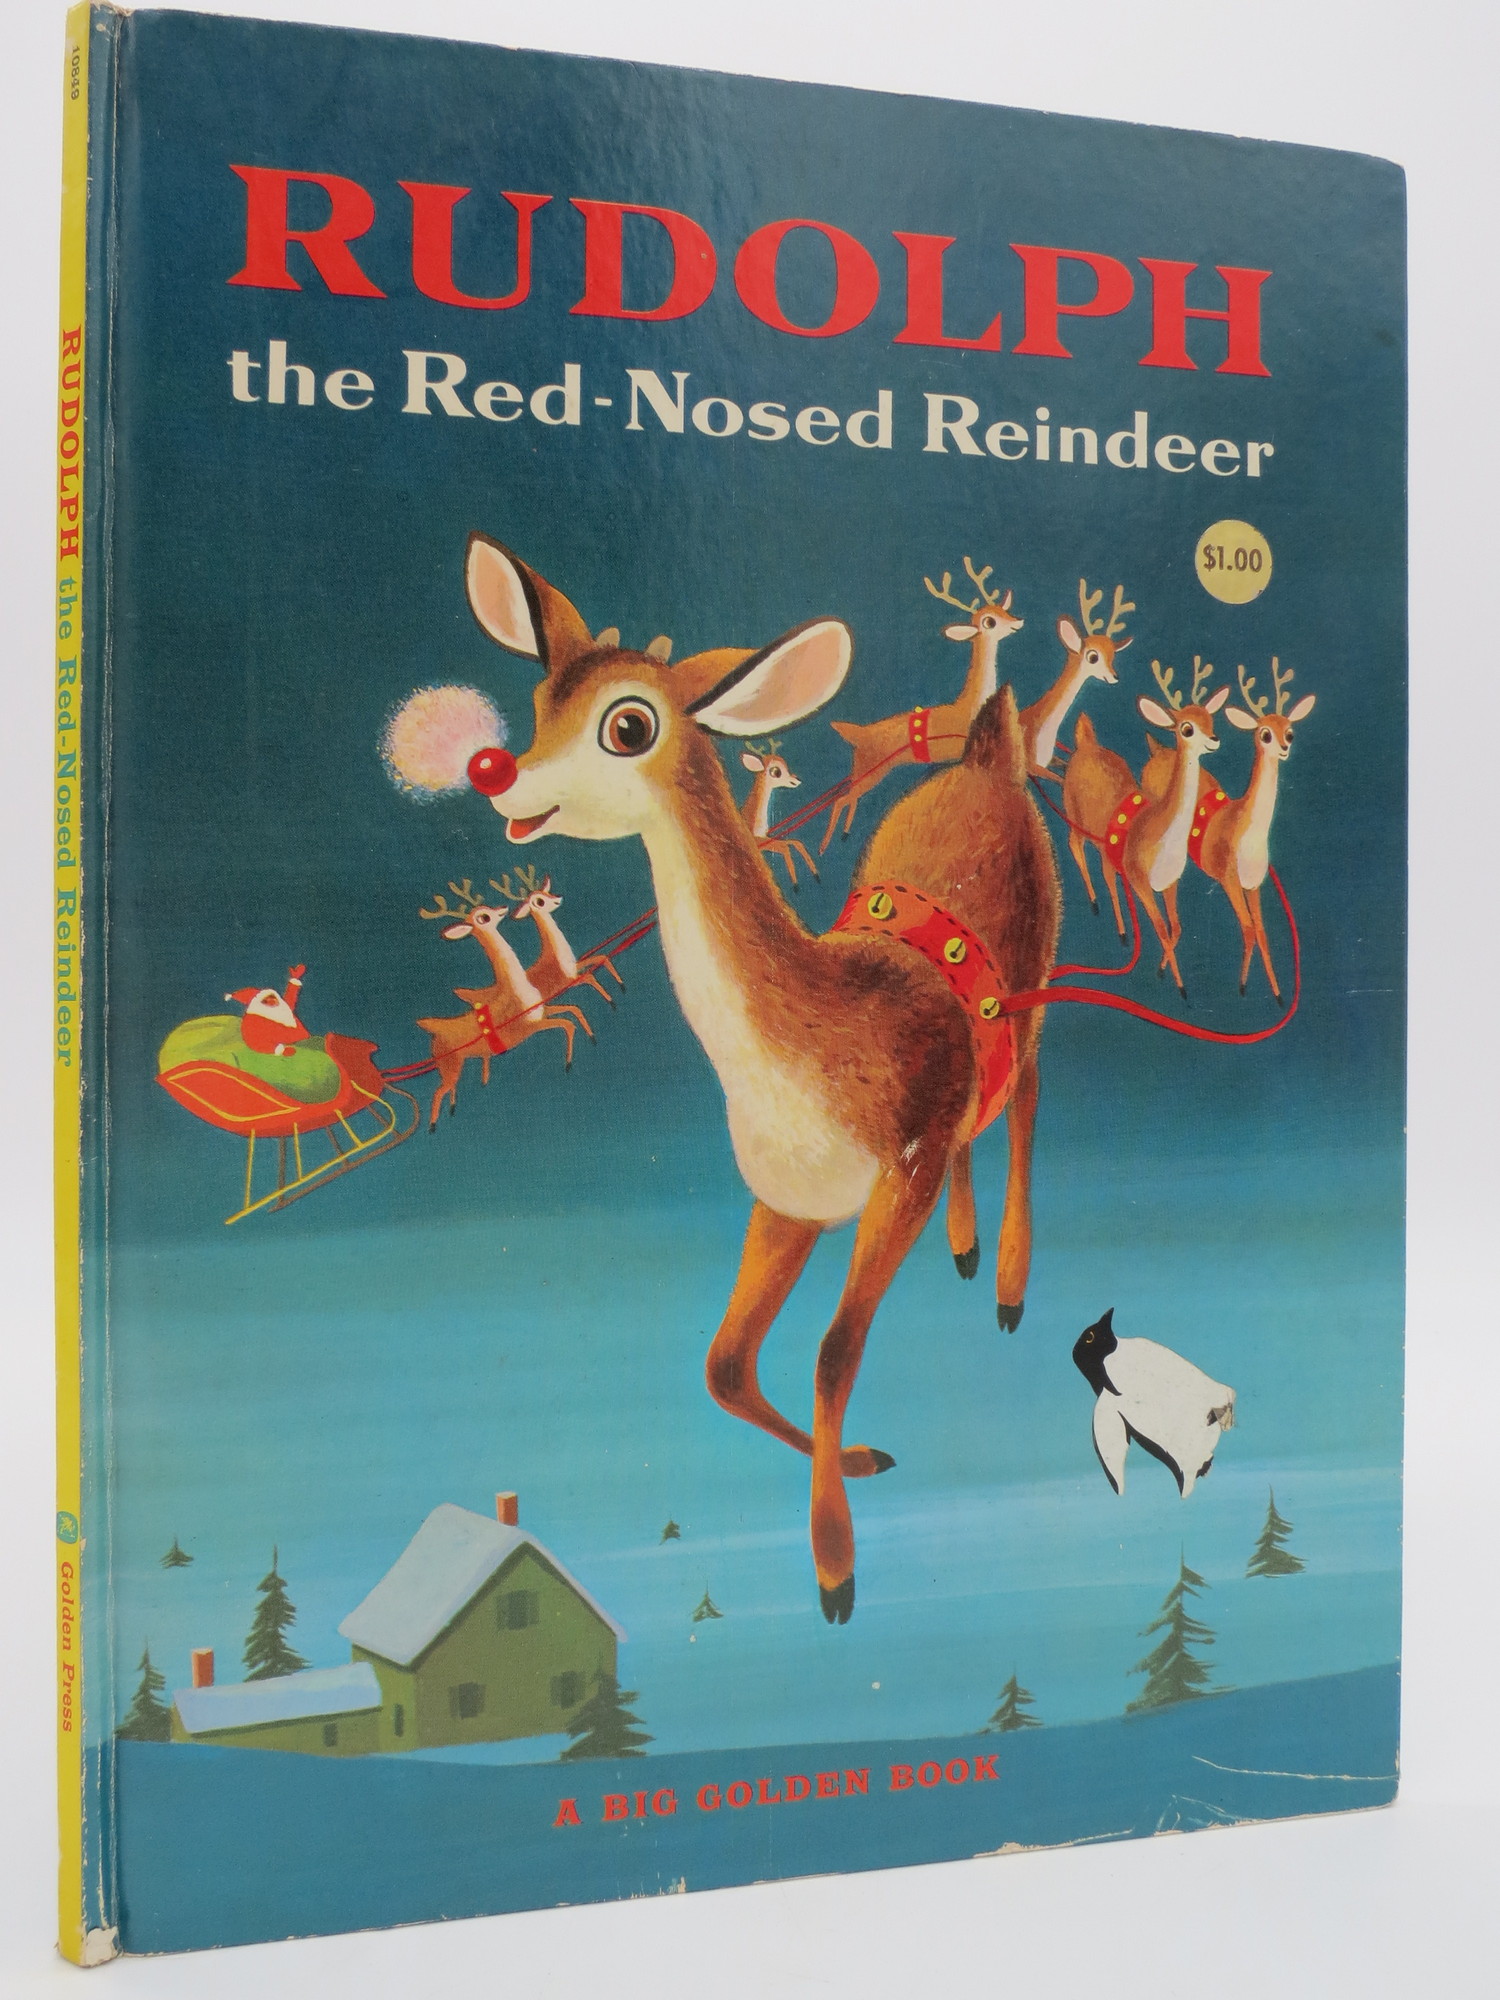 Rudolph the Red-Nosed Reindeer, Red Bonded Leather